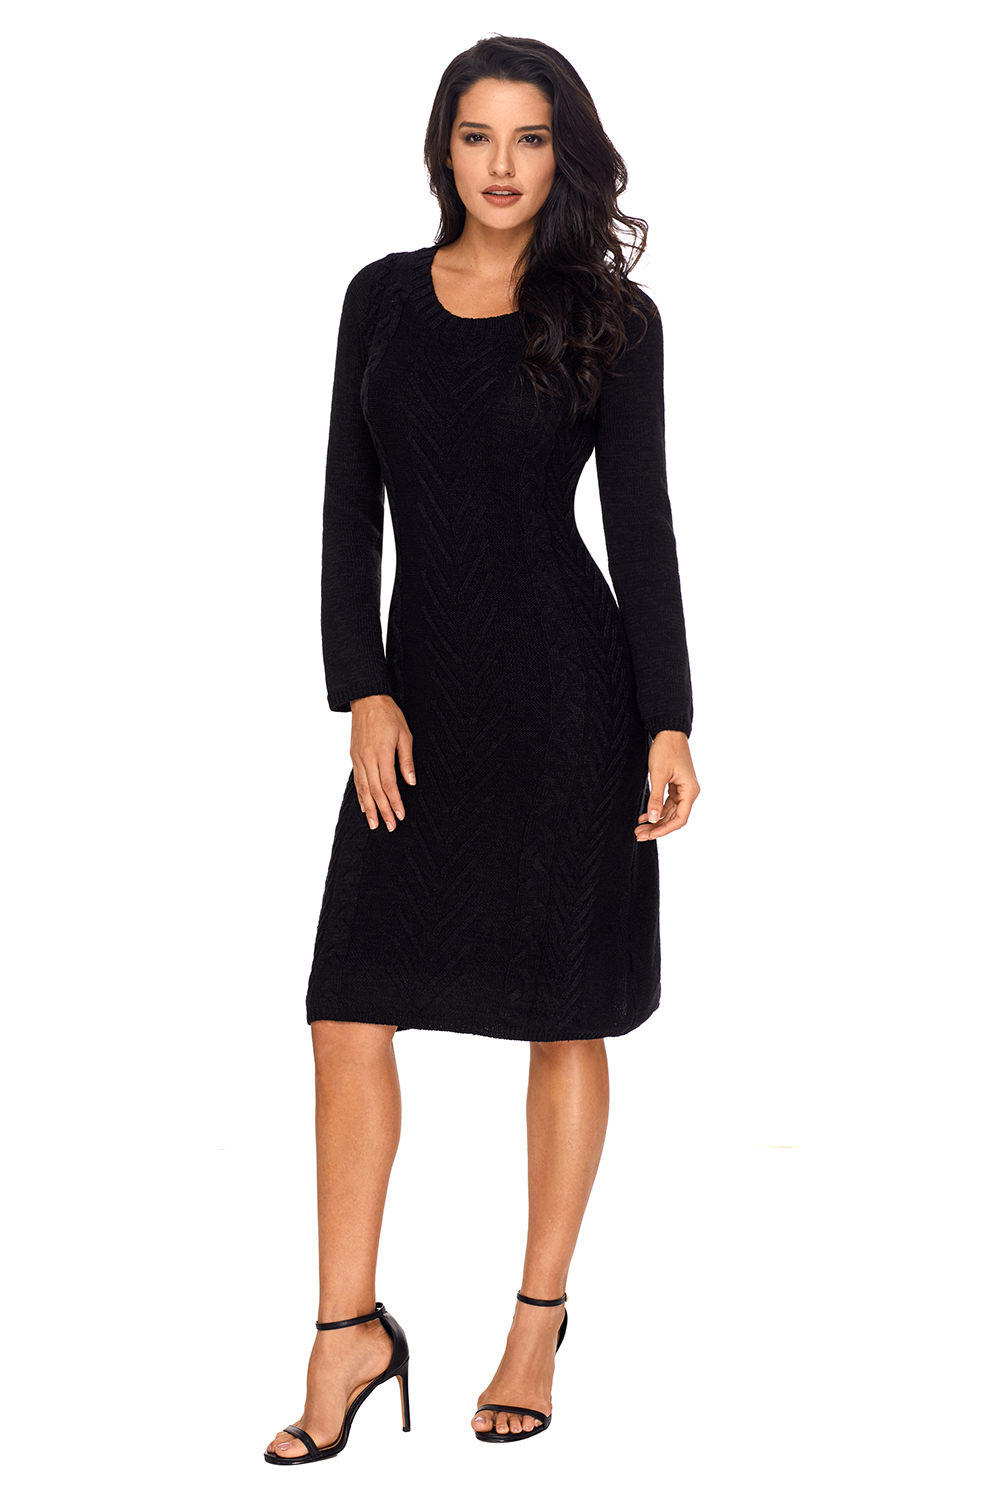 BY27772-2 Black Womens Hand Knitted Sweater Dress